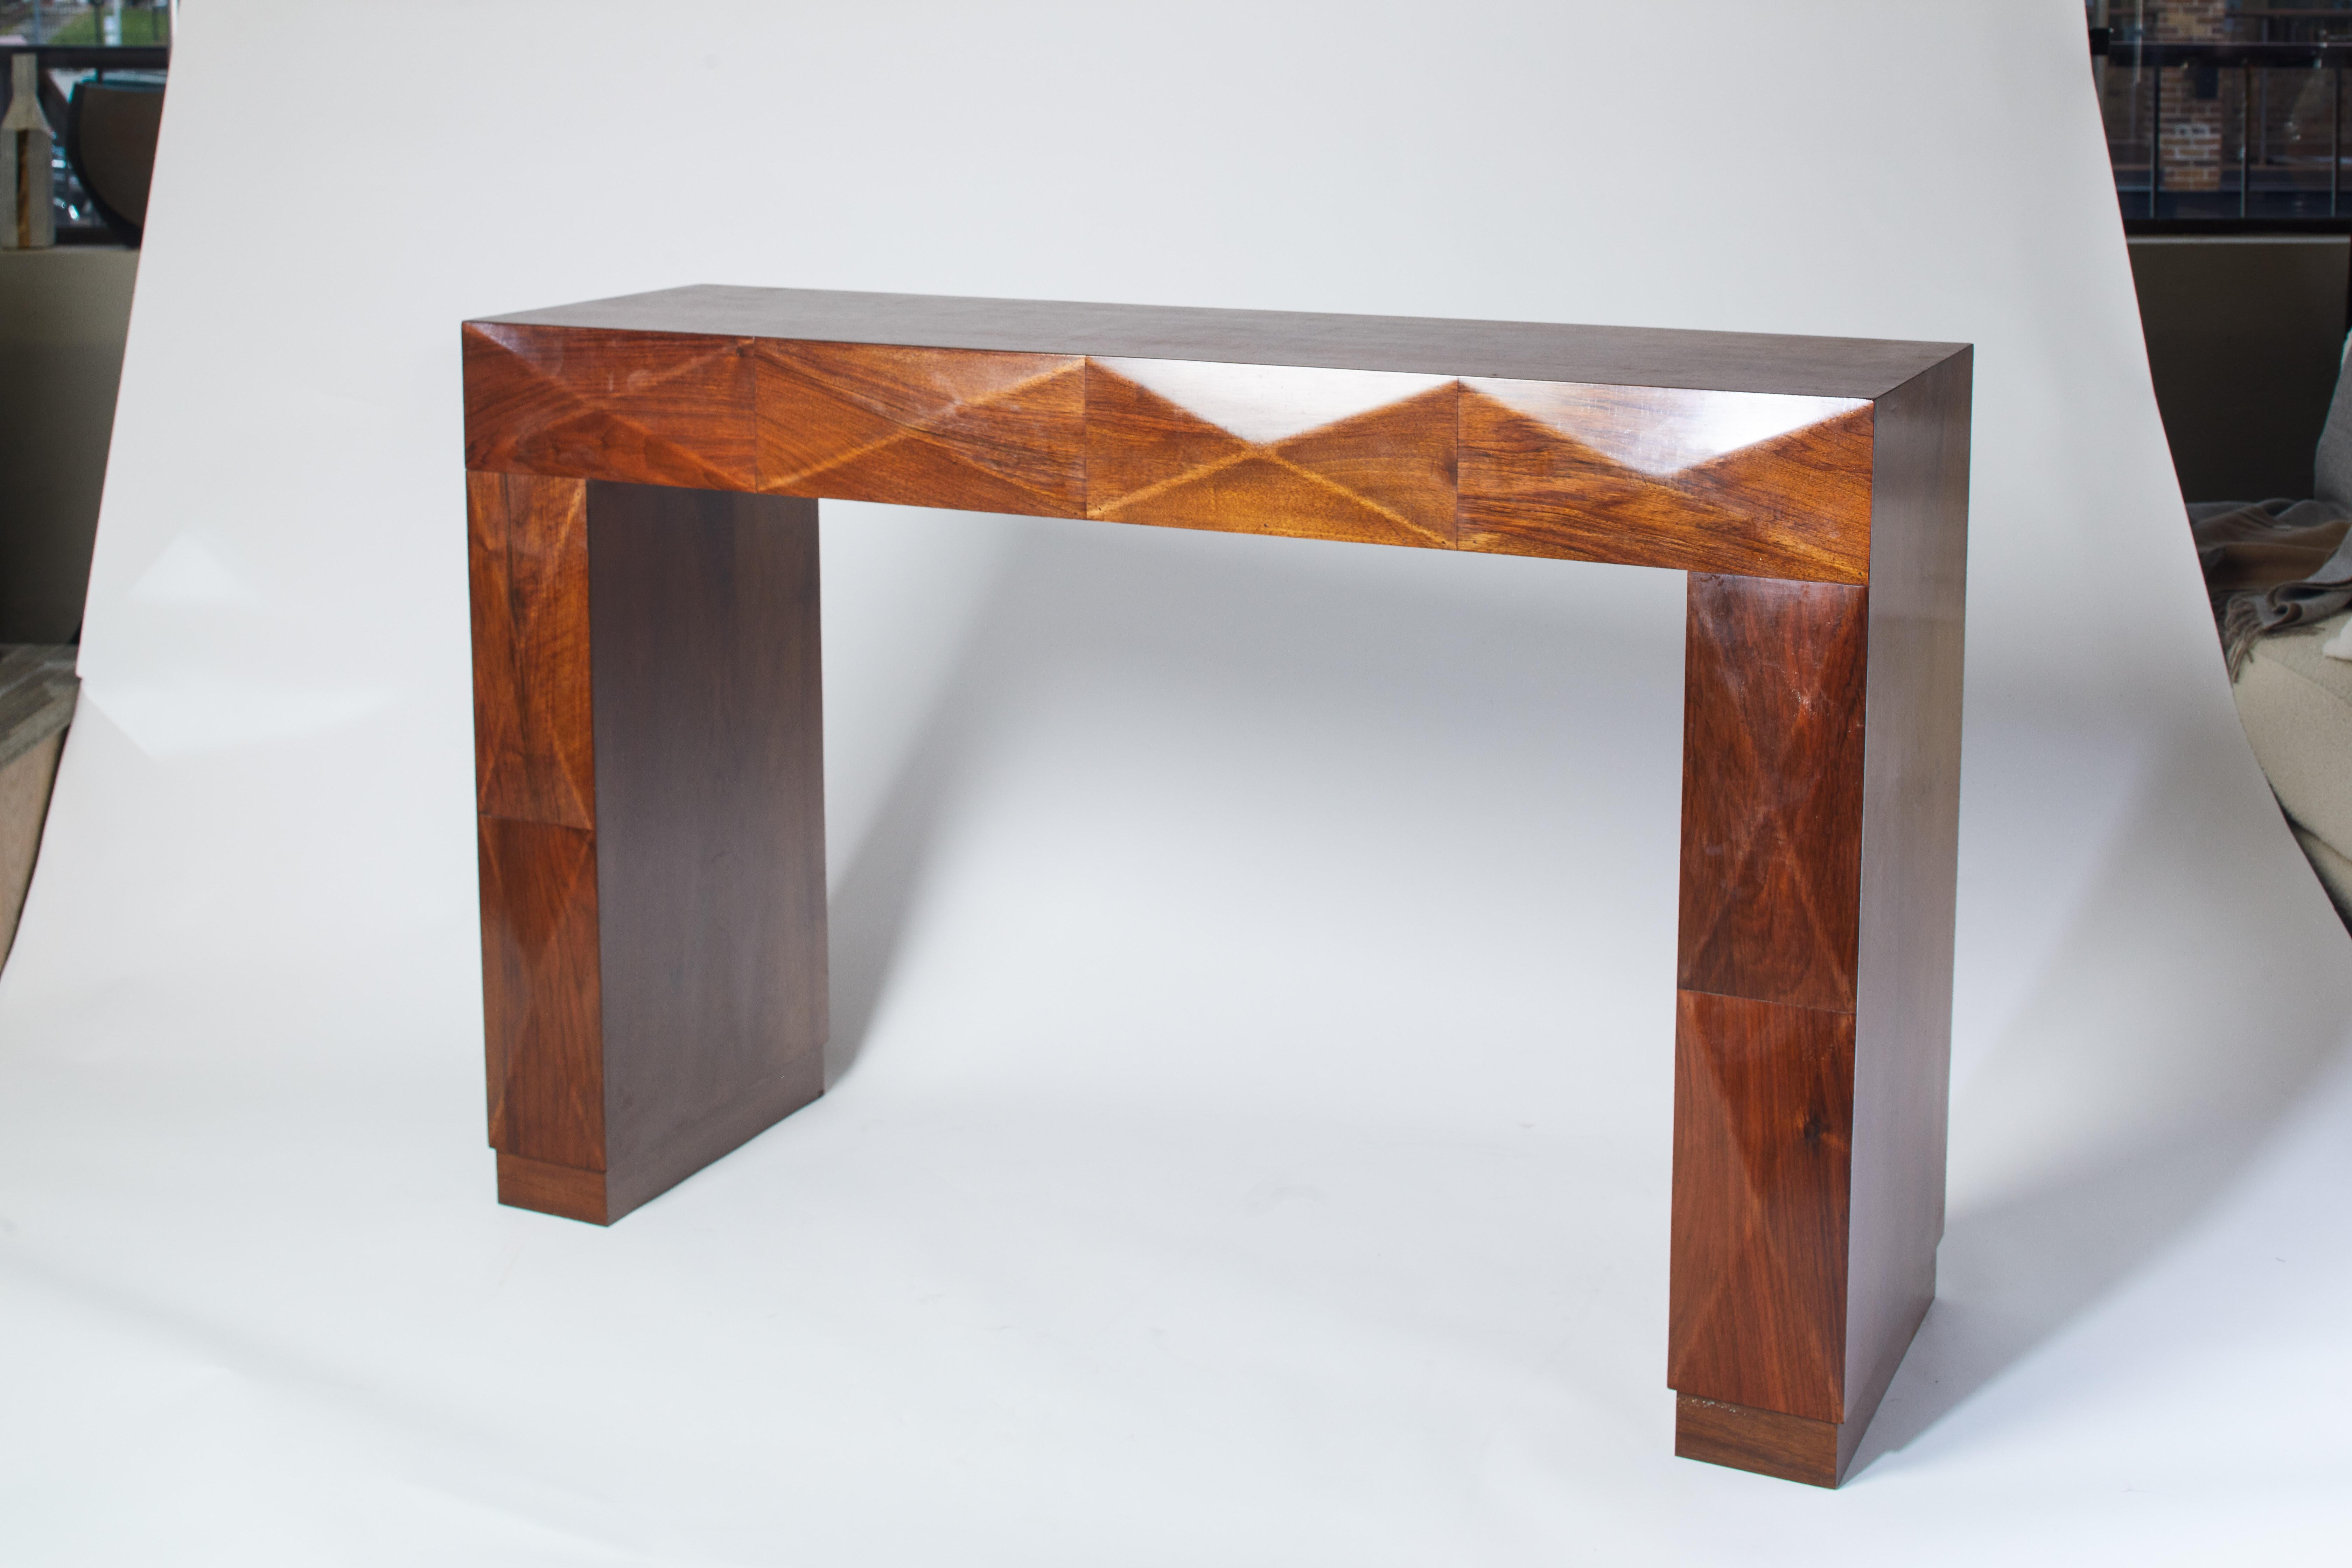 1950s Italian restored walnut console with wood detailing along the front.